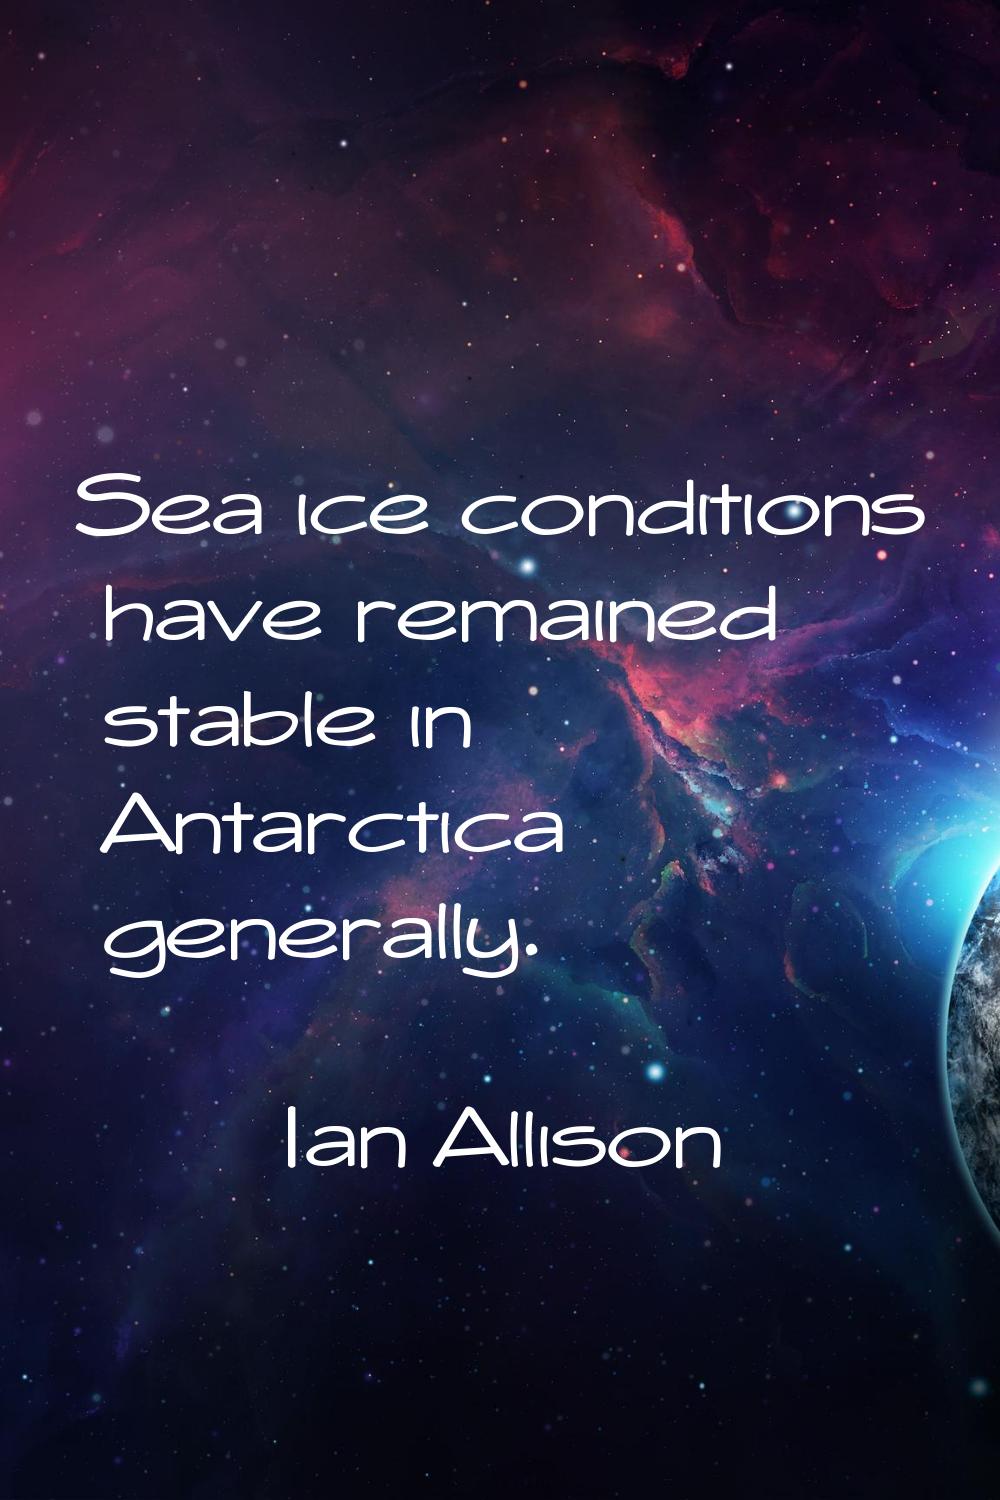 Sea ice conditions have remained stable in Antarctica generally.